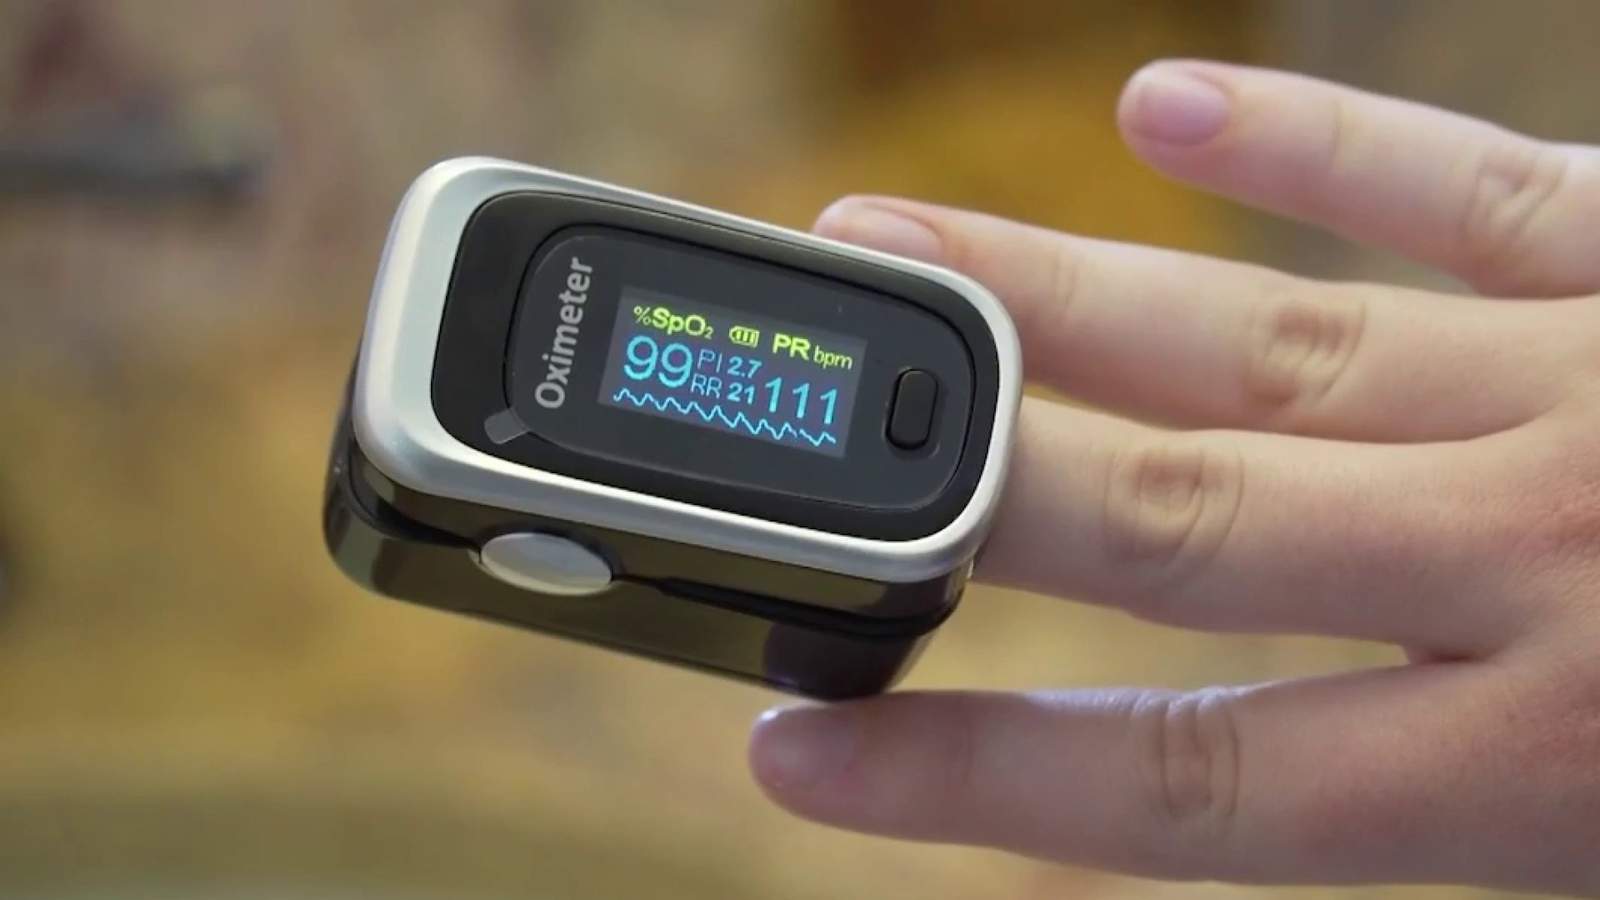 Pulse oximeters can help detect early signs of COVID-19, pneumonia